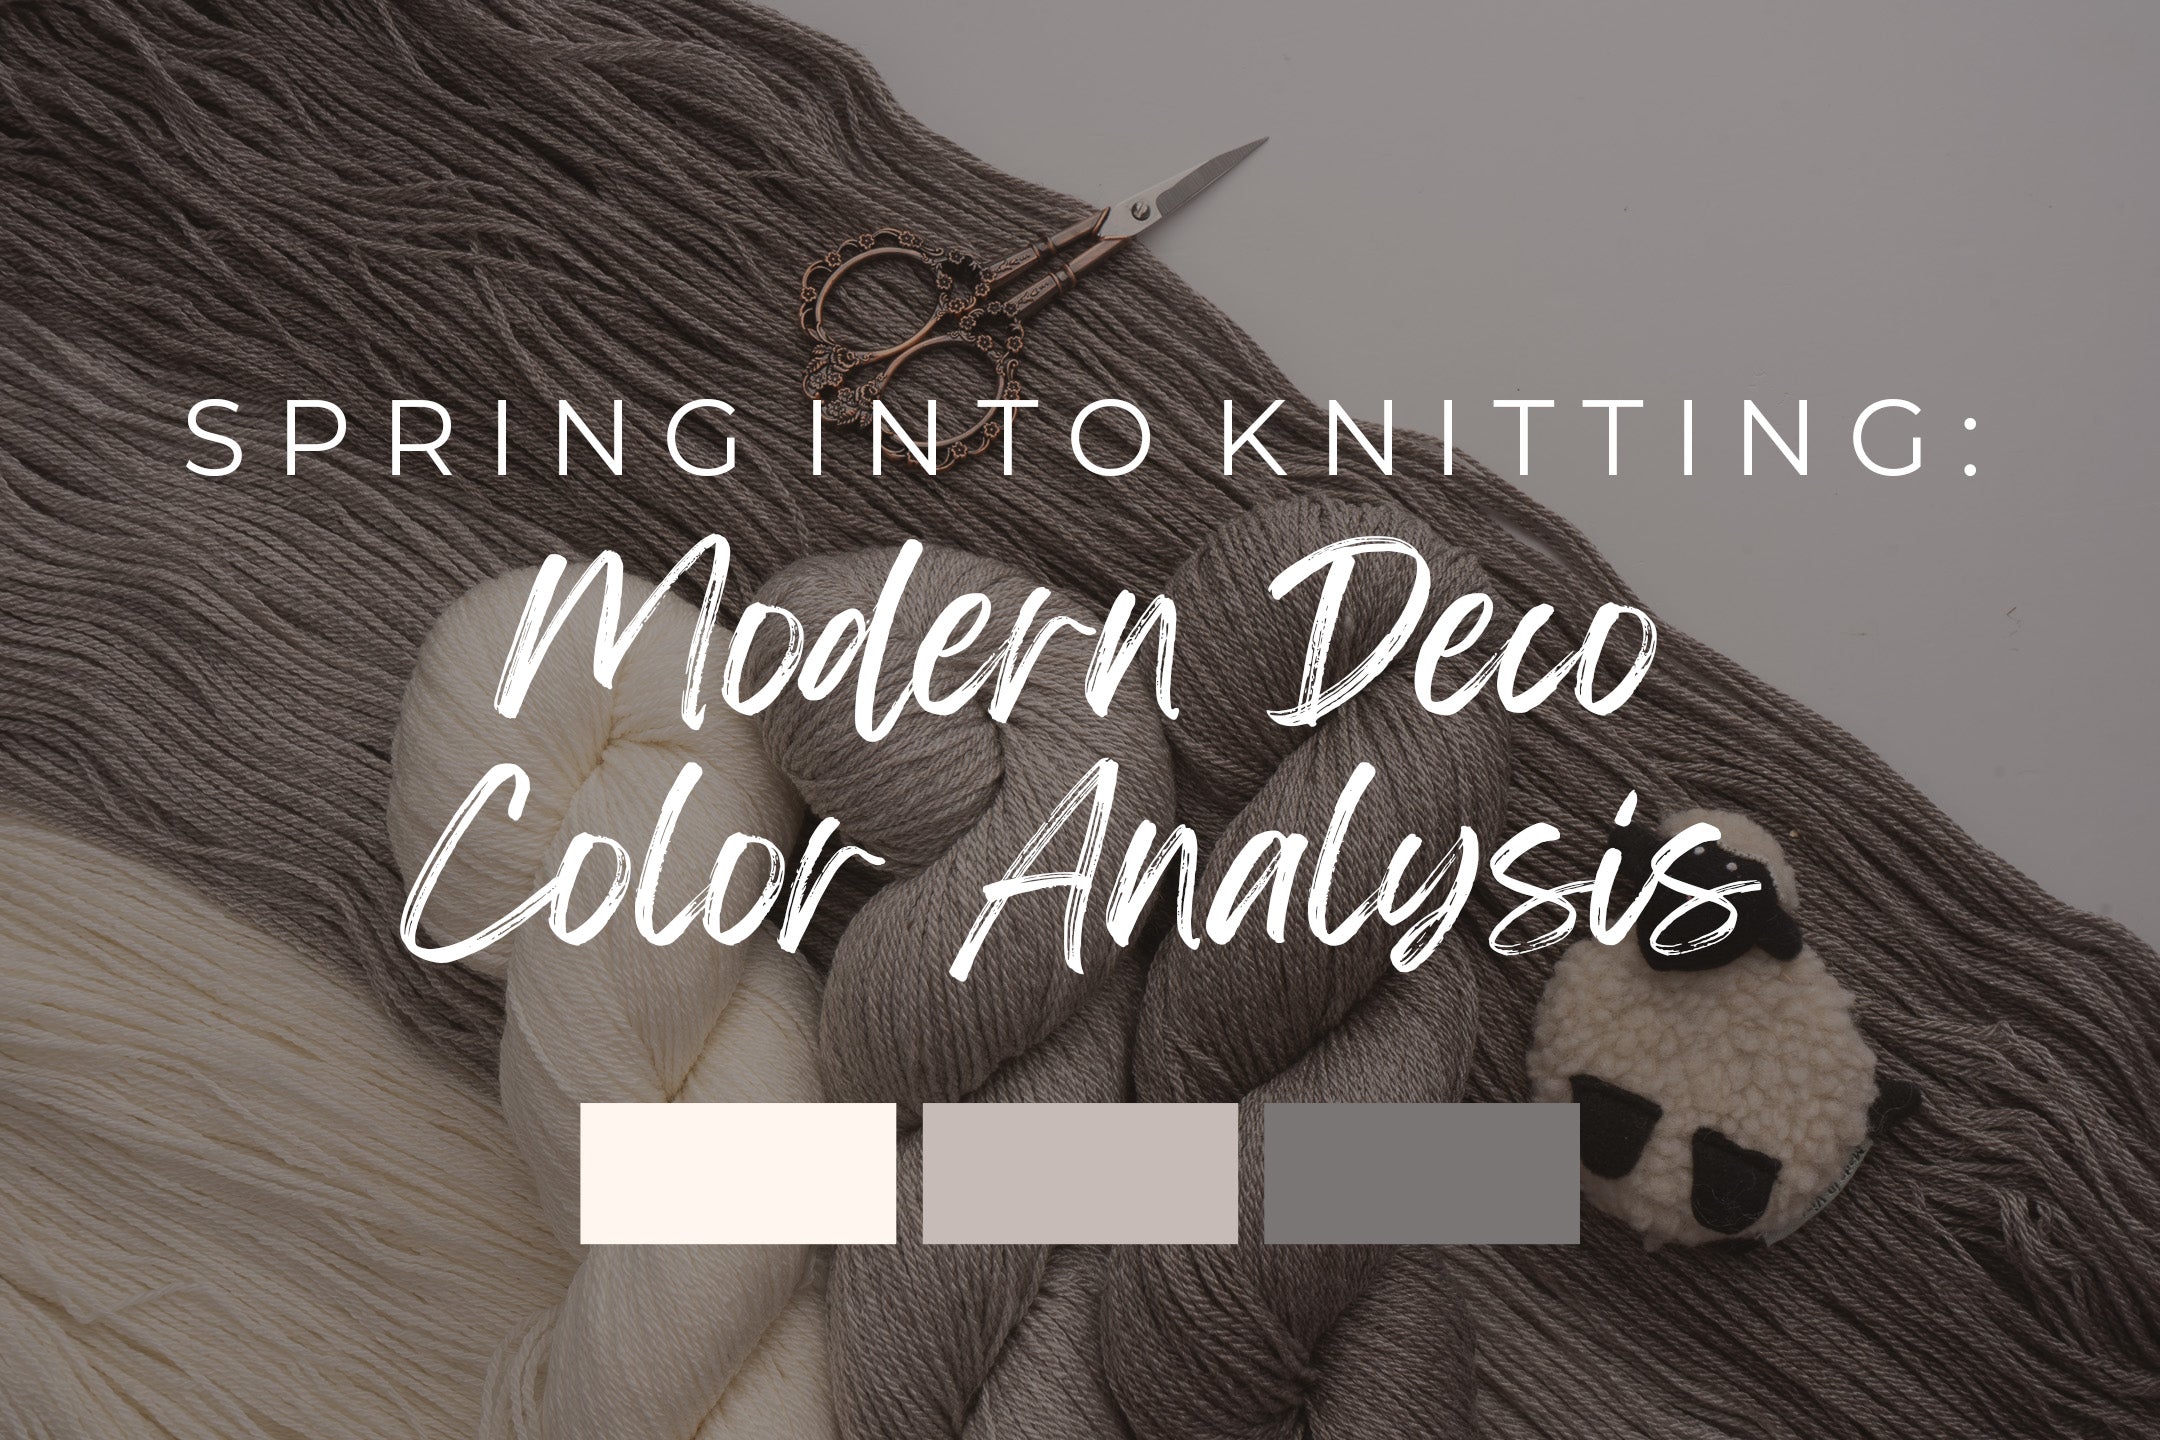 Spring into Knitting: Modern Deco Color Analysis